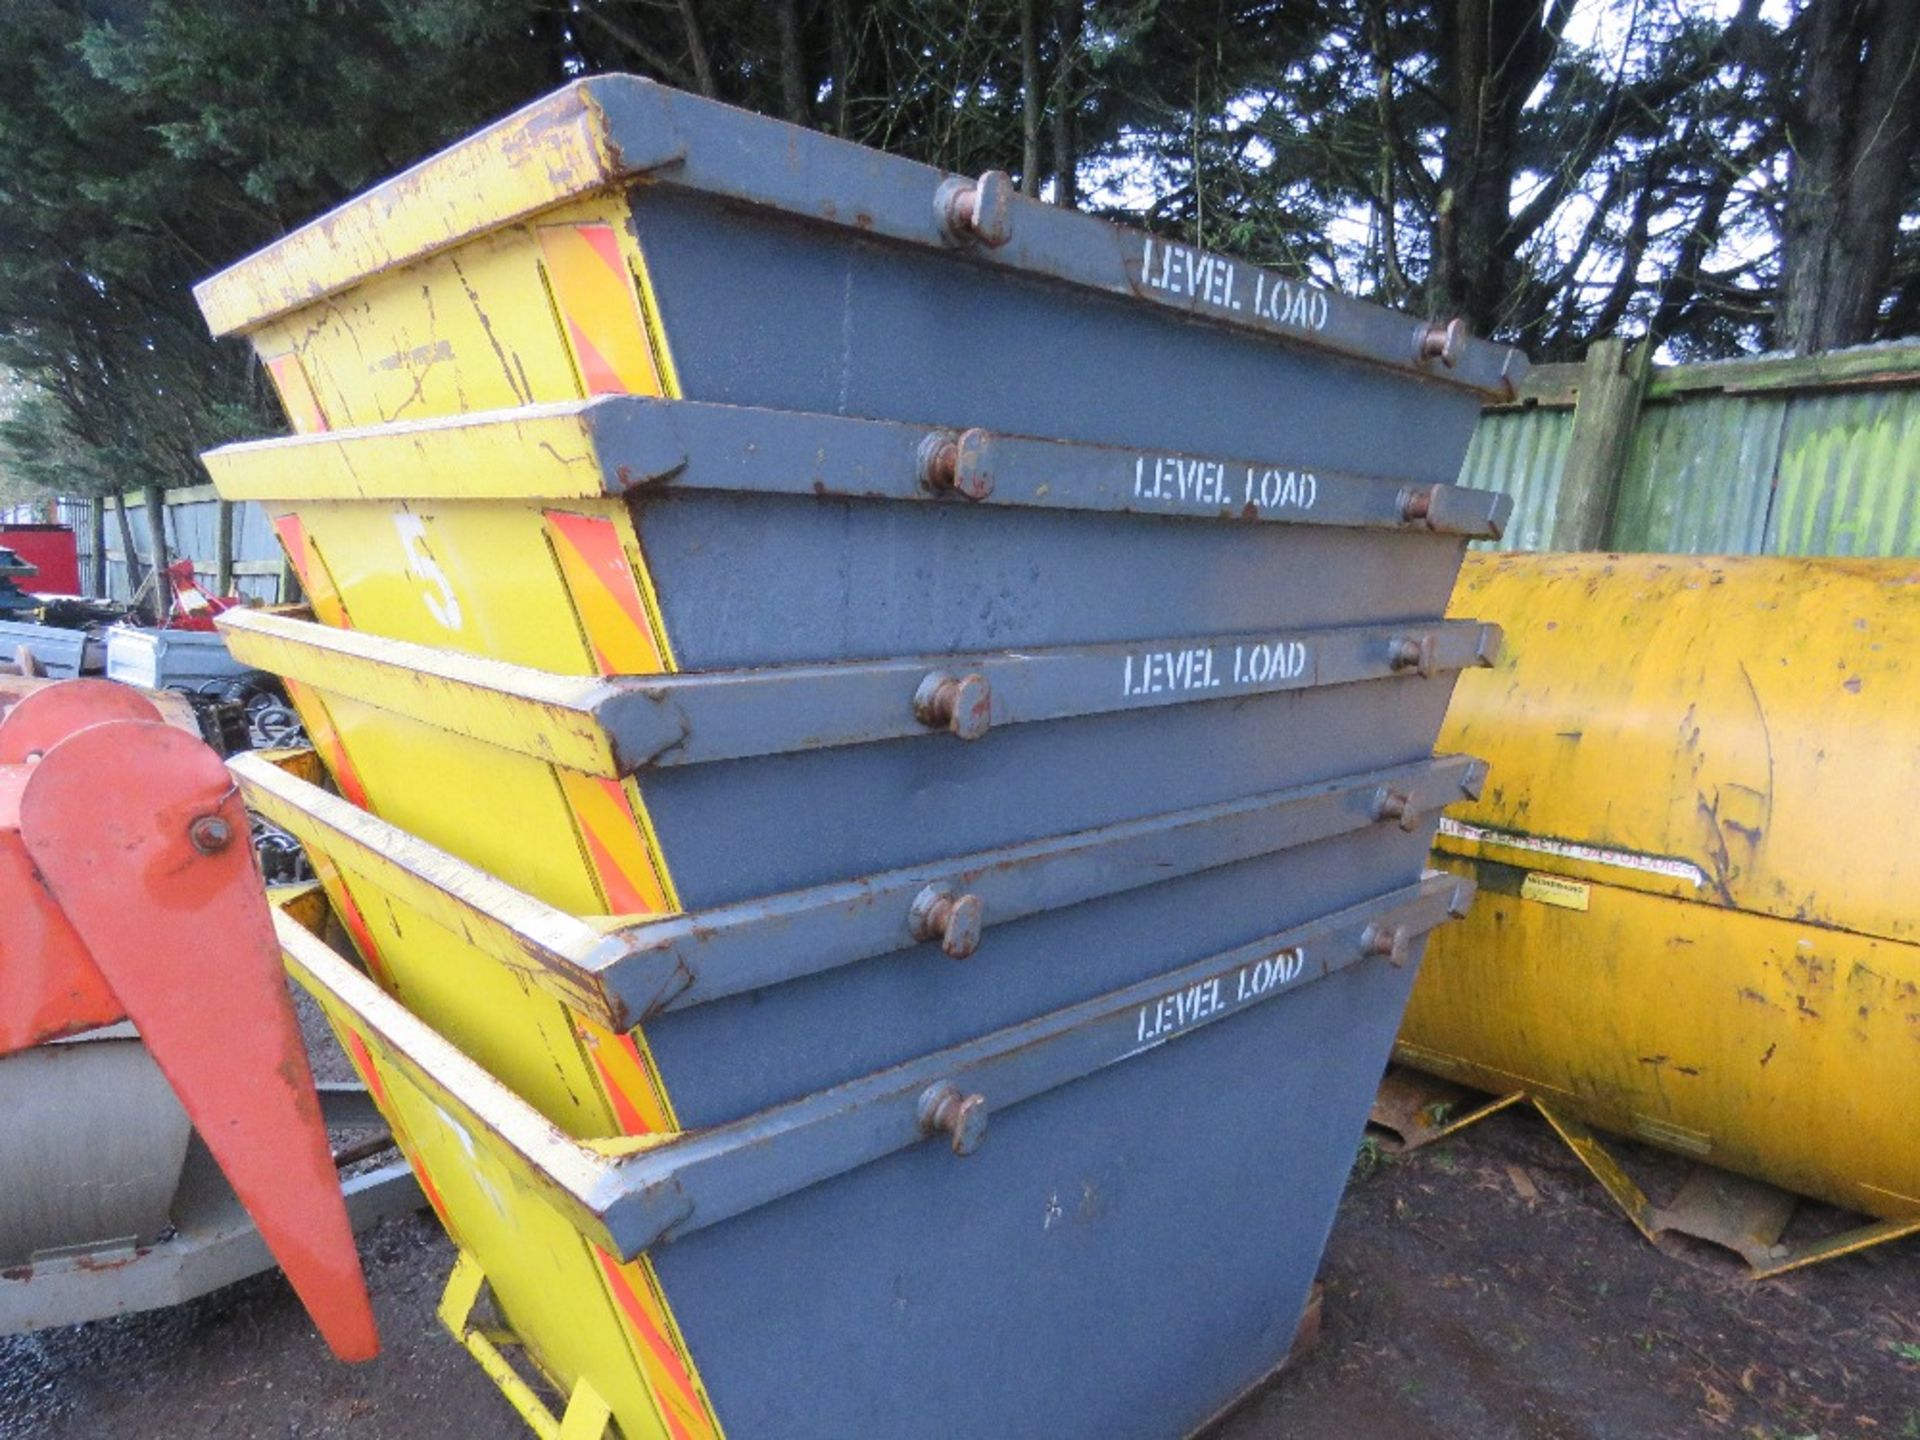 5 X CHAIN LIFT WASTE SKIPS, 2 YARD CAPACITY. DIRECT FROM LOCAL COMPANY WHO ARE DOWNSIZING.